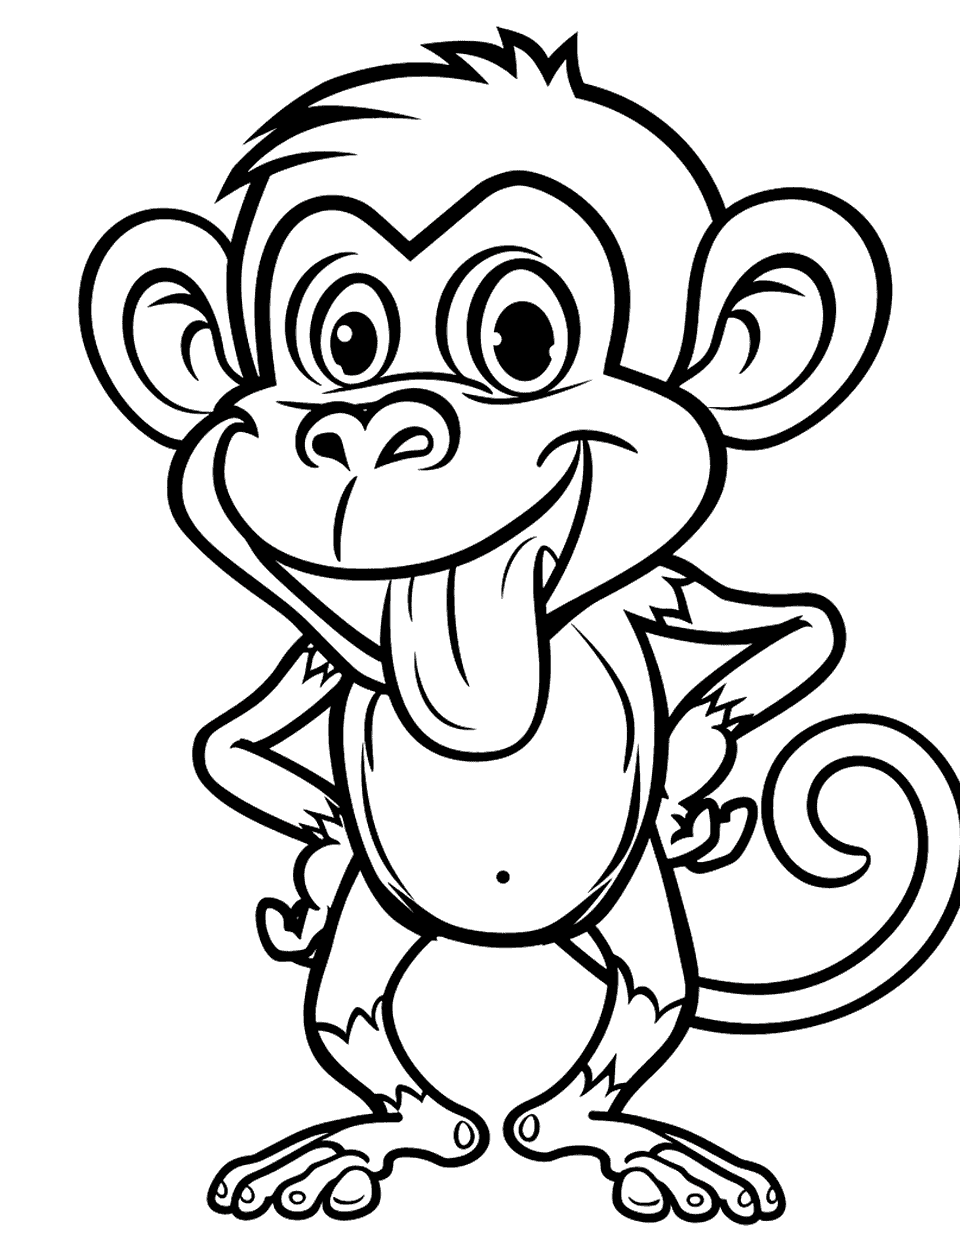 Monkey Making Faces Coloring Page - A playful monkey sticking out its tongue, with hands on its hips.